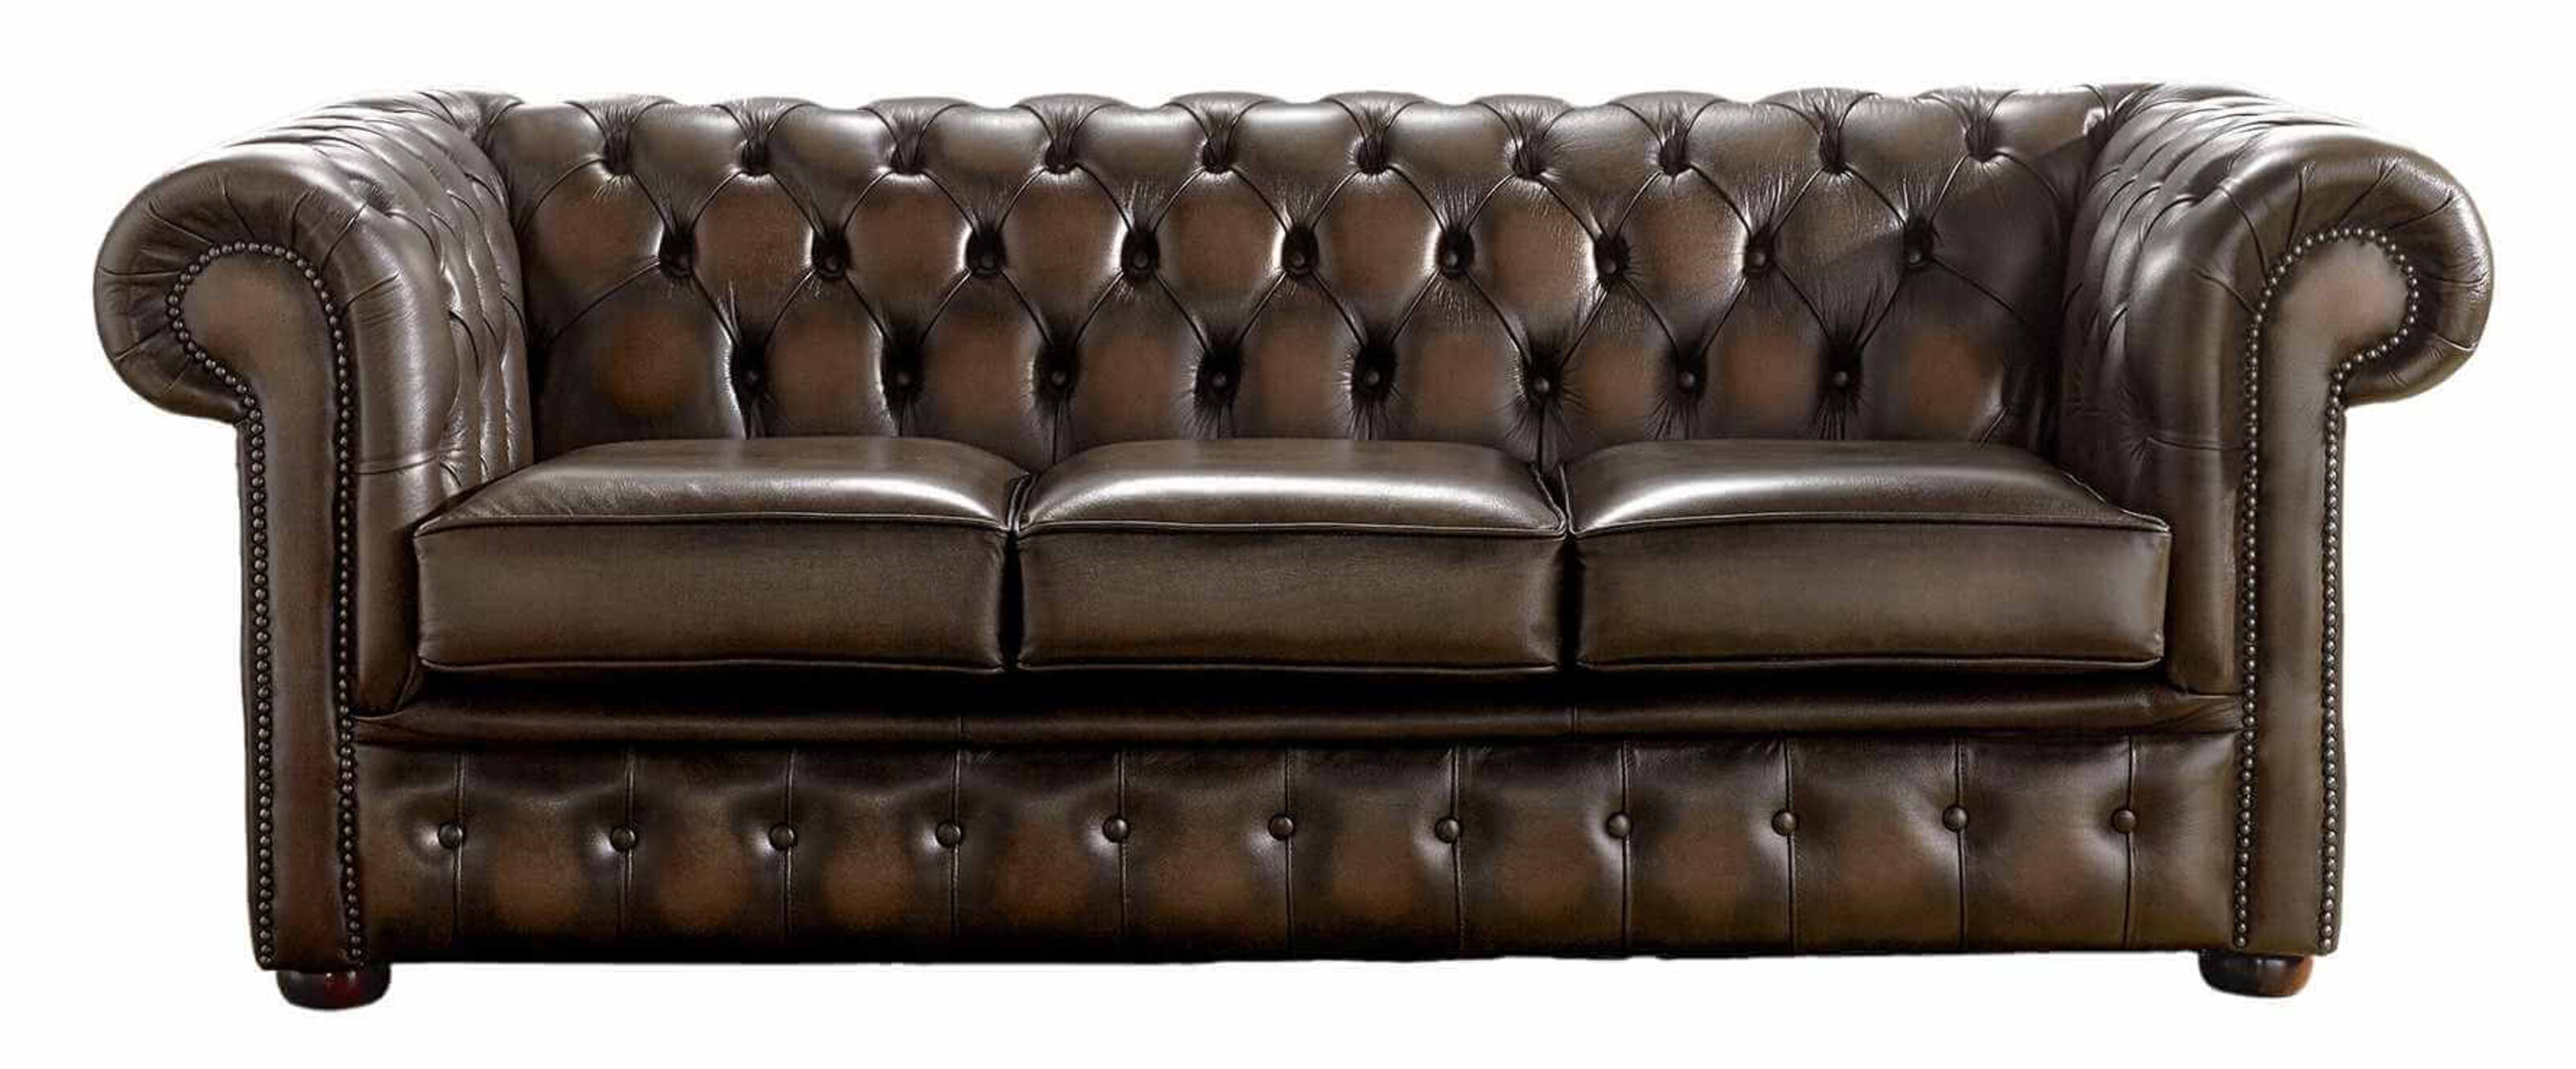 Timeless Style: Discover Chesterfield Sofas on Amazon  %Post Title